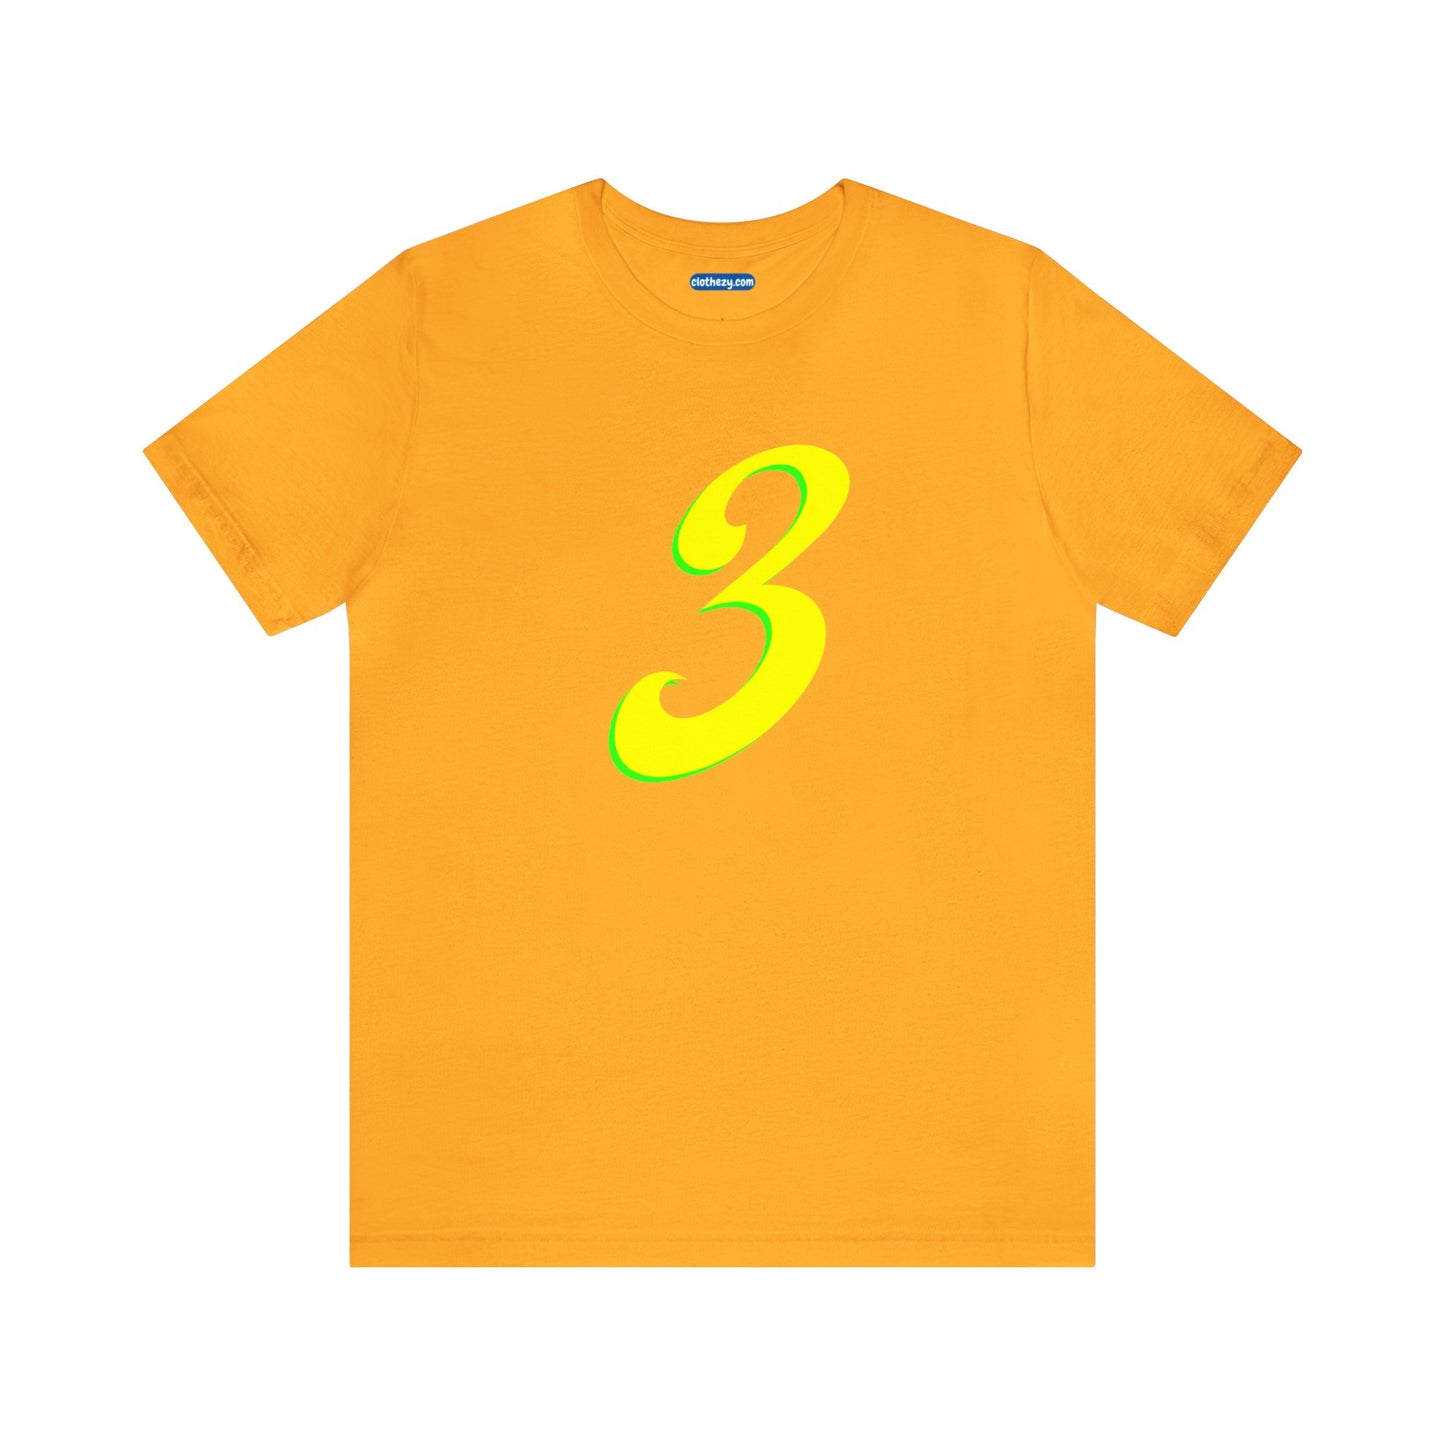 Number 3 Design - Soft Cotton Tee for birthdays and celebrations, Gift for friends and family, Multiple Options by clothezy.com in Green Heather Size Small - Buy Now